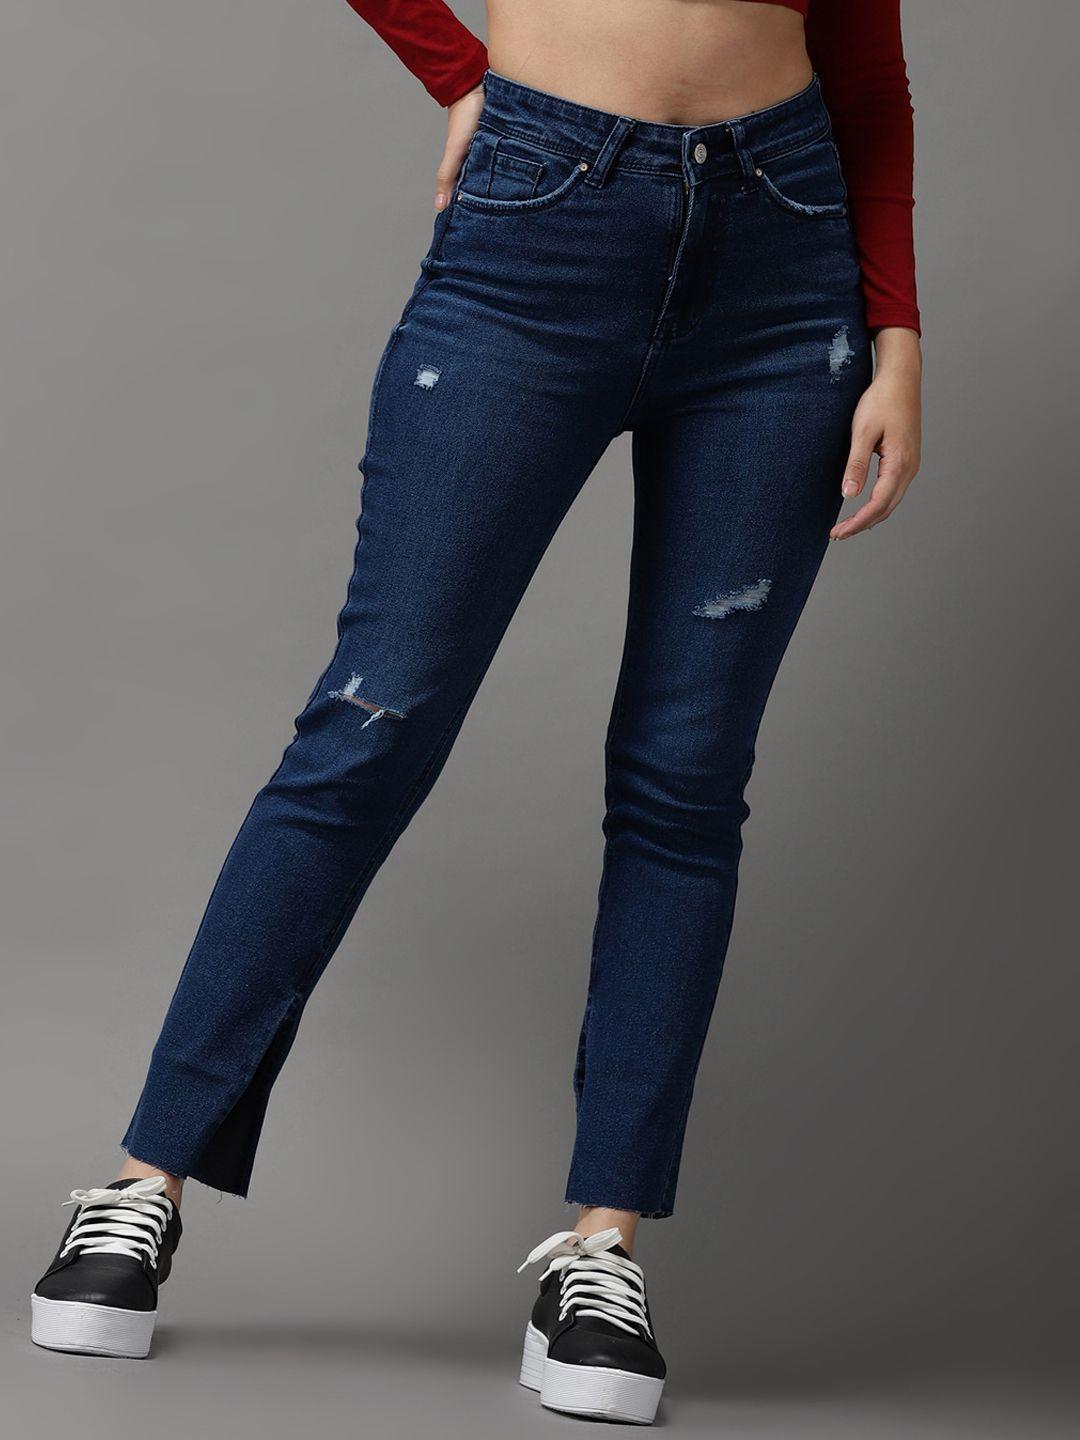 showoff women navy blue jean slim fit high-rise mildly distressed light fade stretchable jeans